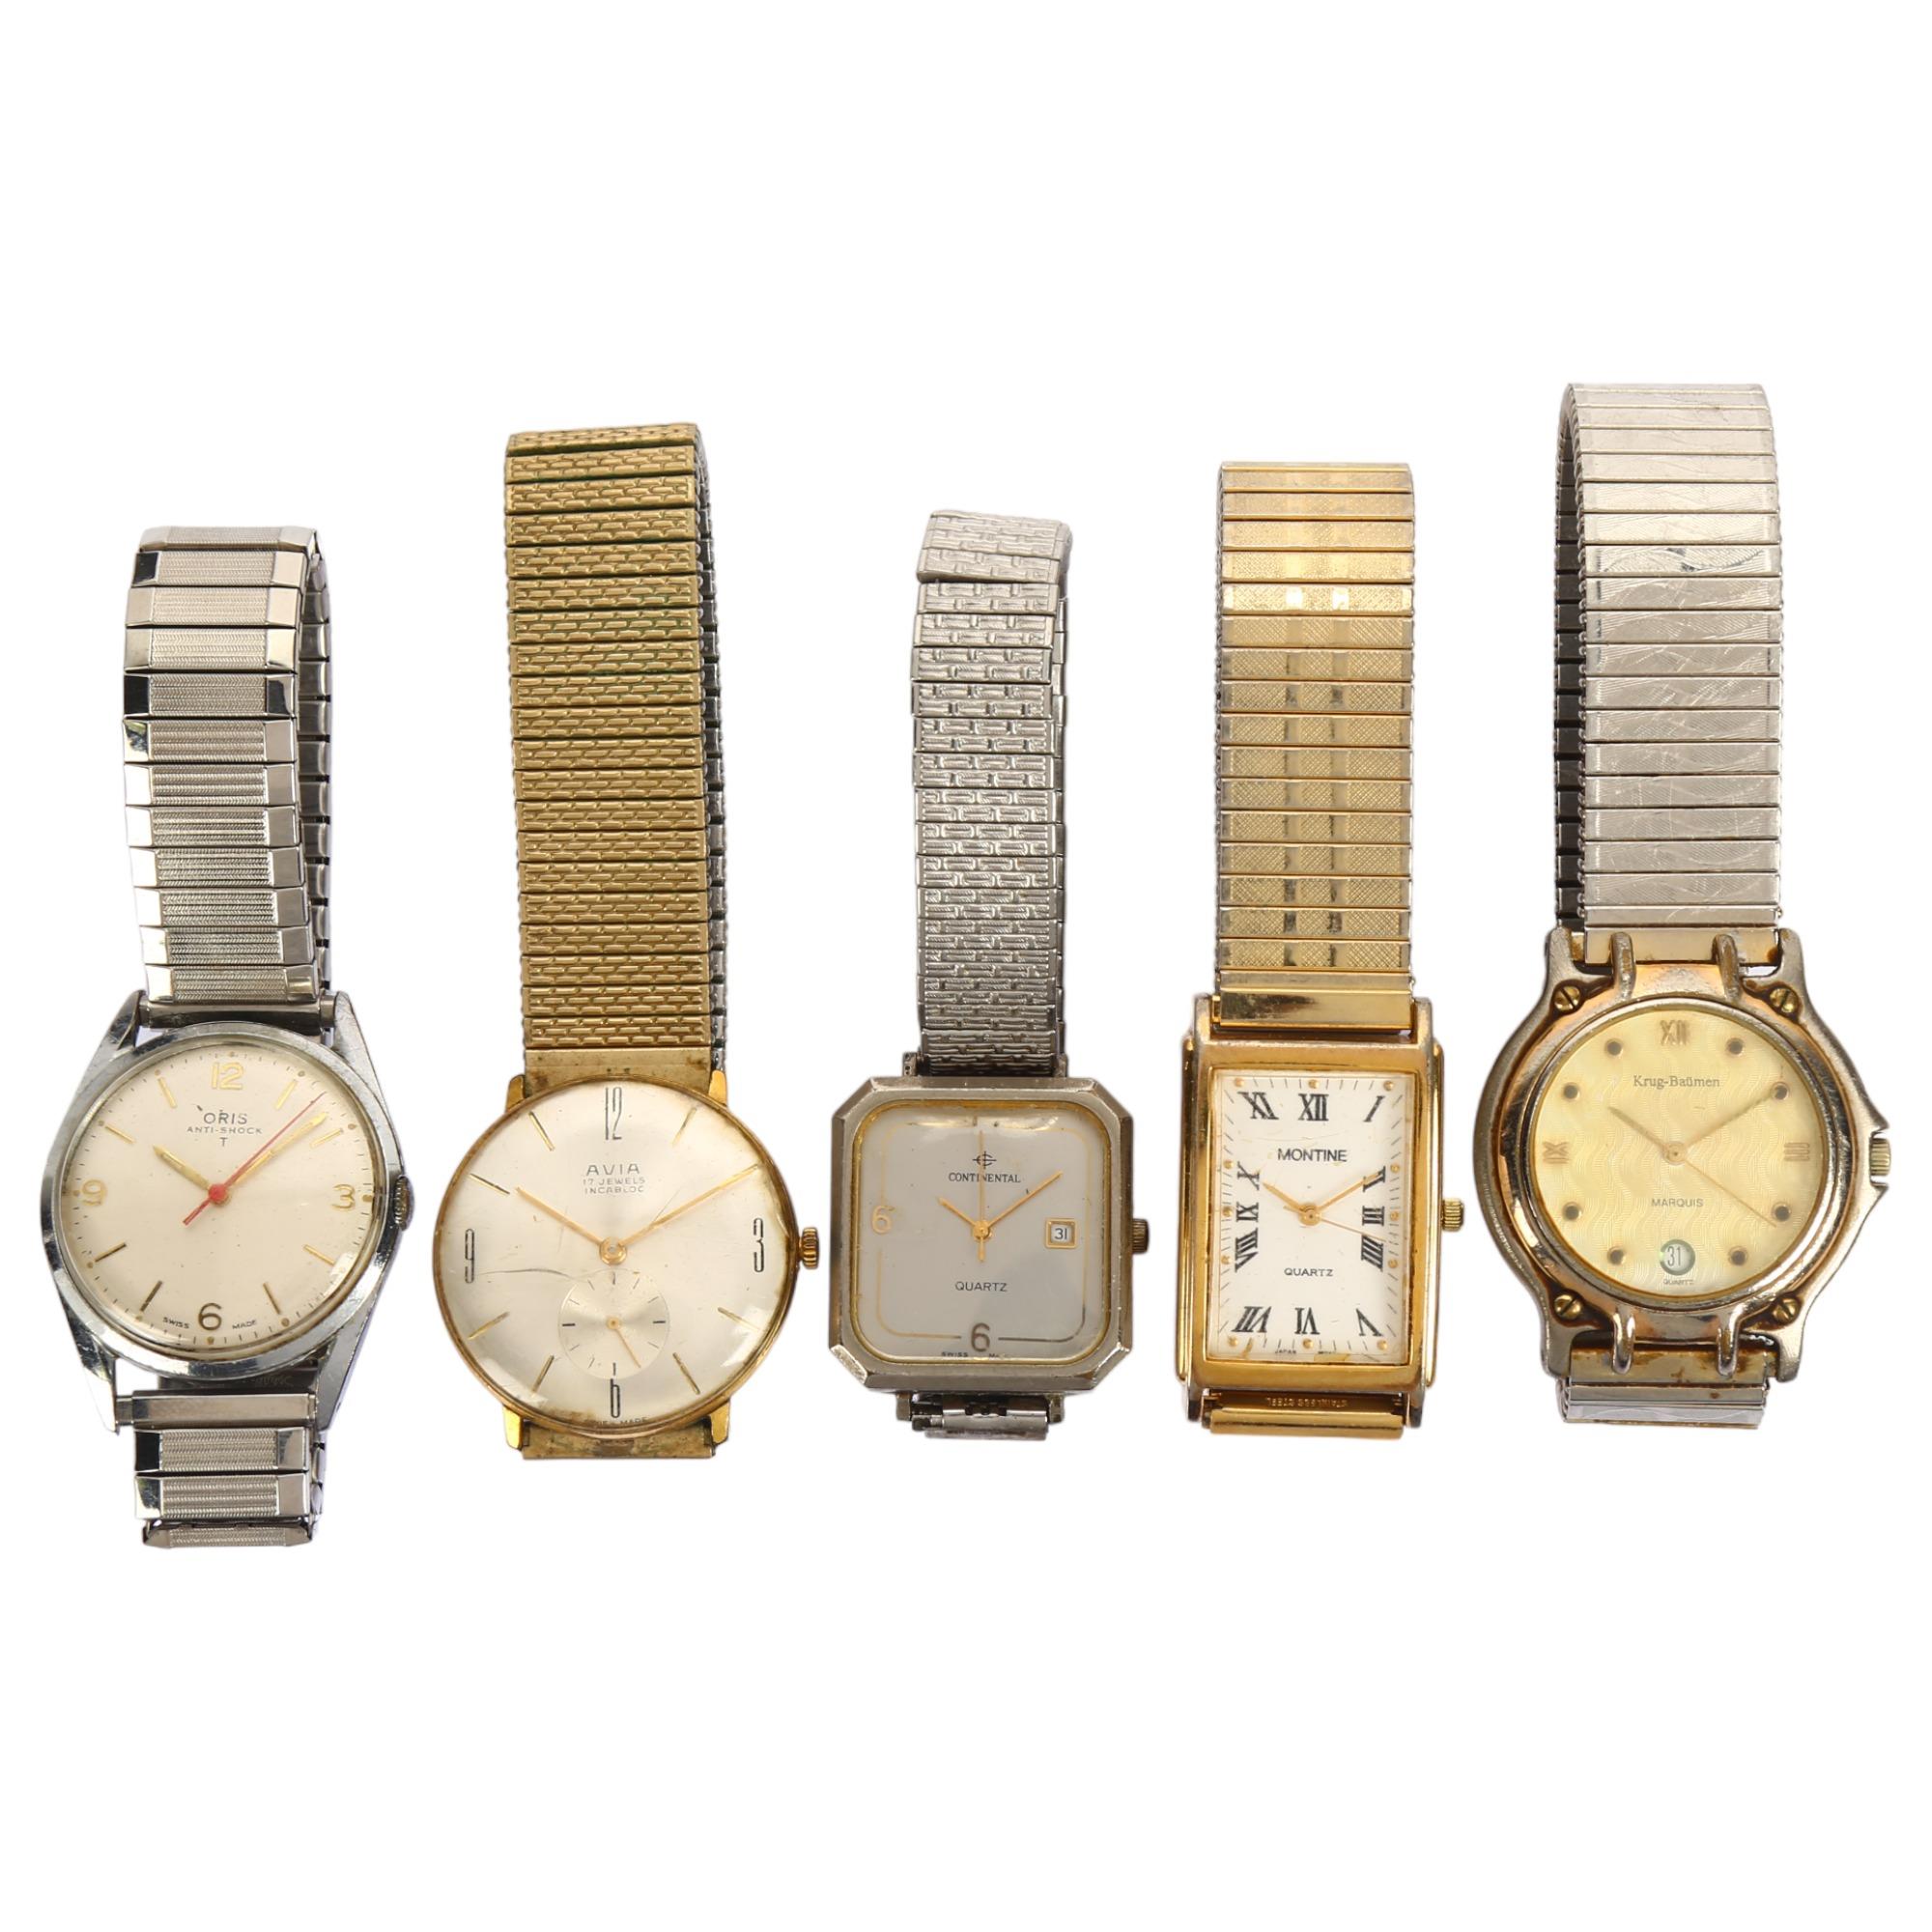 5 various wristwatches, including Oris, Avia etc (5) Lot sold as seen unless specific item(s)